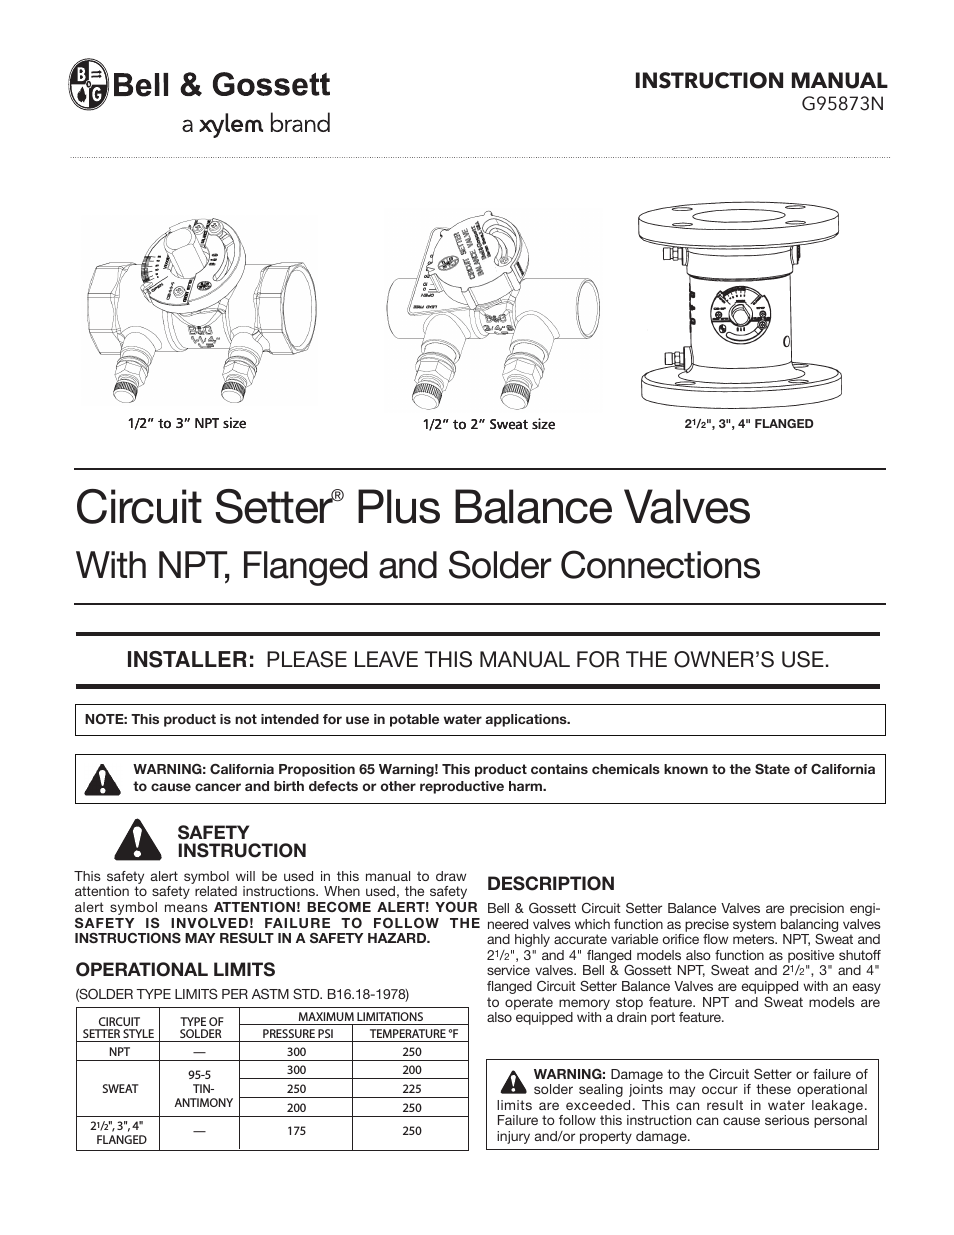 G95873N Circuit Setter Plus Balance Valves With NPT, Flanged and Solder Connections